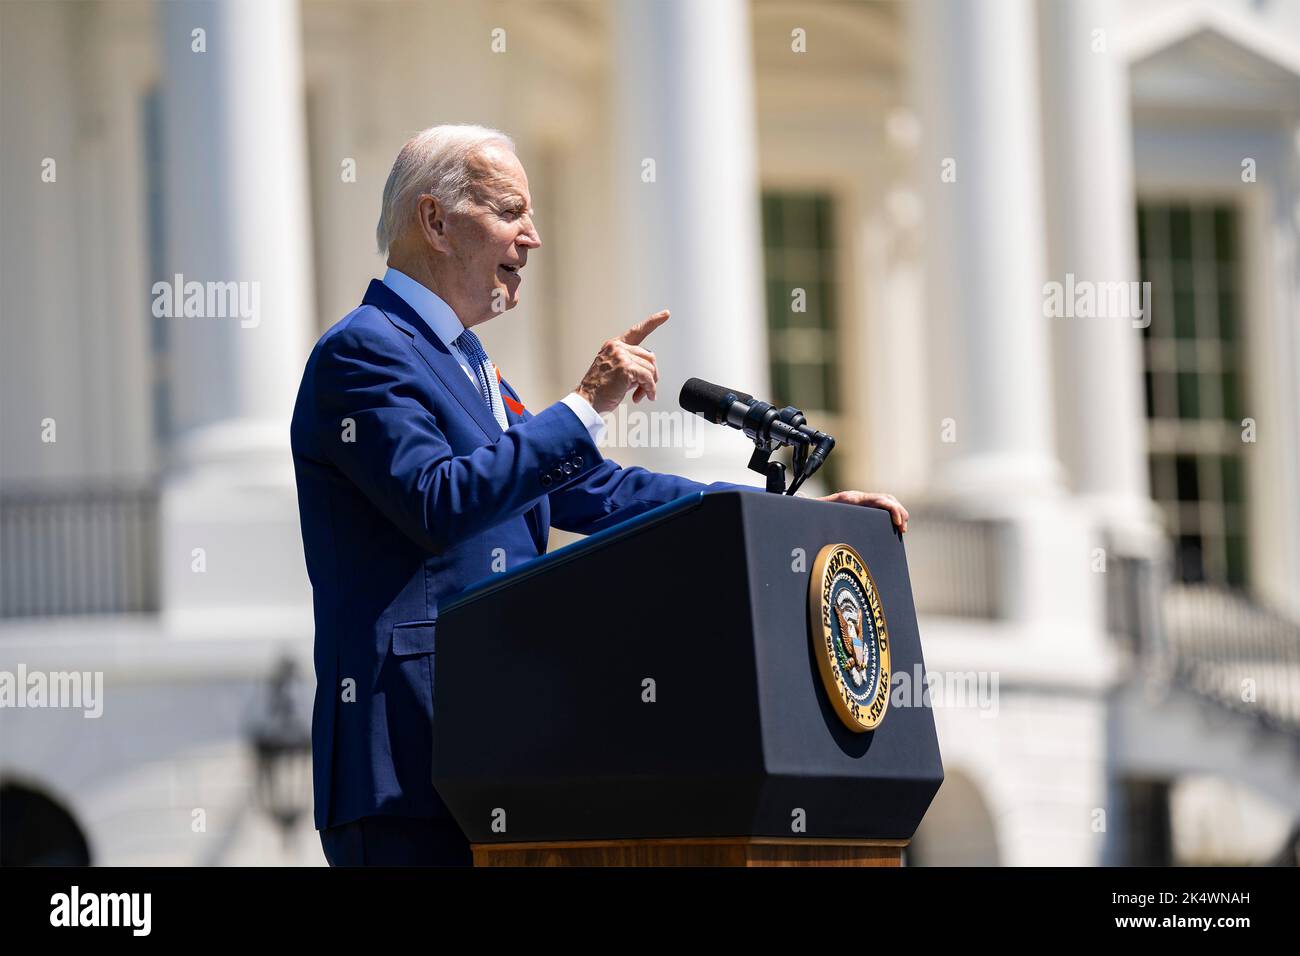 Washington, United States. 11 July, 2022. U.S. President Joe Biden, delivers remarks at an event to celebrate passage of the Bipartisan Safer Communities Act, on the South Lawn of the White House, July 11, 2022, in Washington, D.C. Washington, United States. 11 July, 2022. Stock Photo